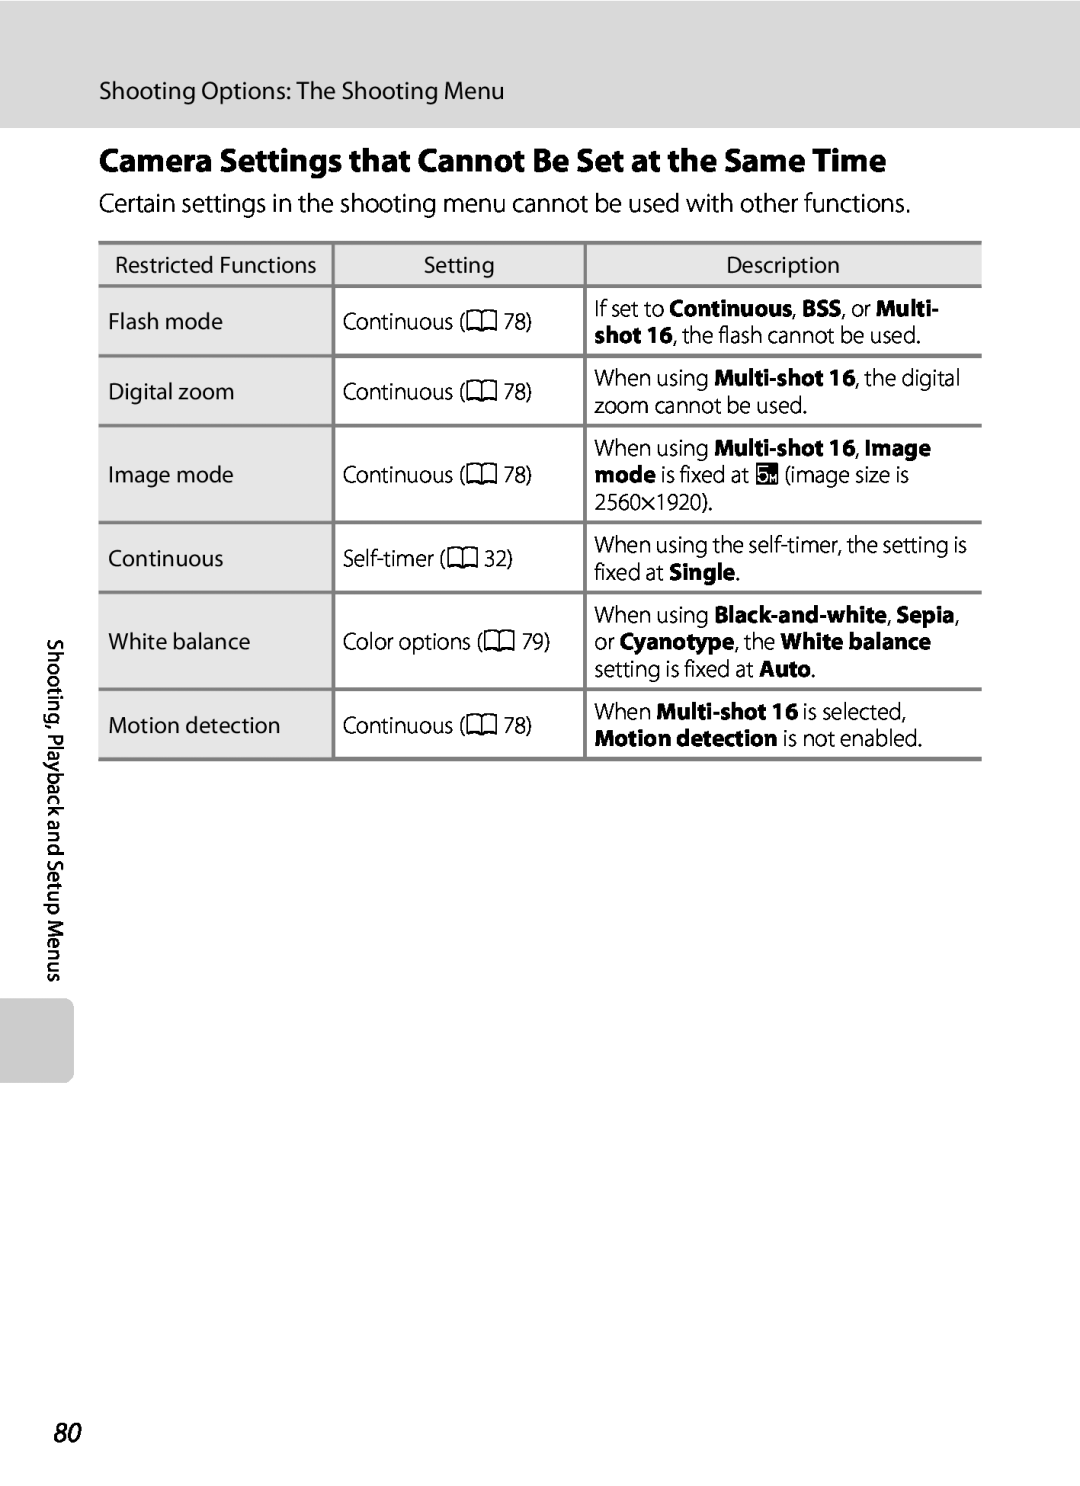 Nikon L21, COOLPIXL22R user manual Camera Settings that Cannot Be Set at the Same Time, When using Multi-shot 16, Image 